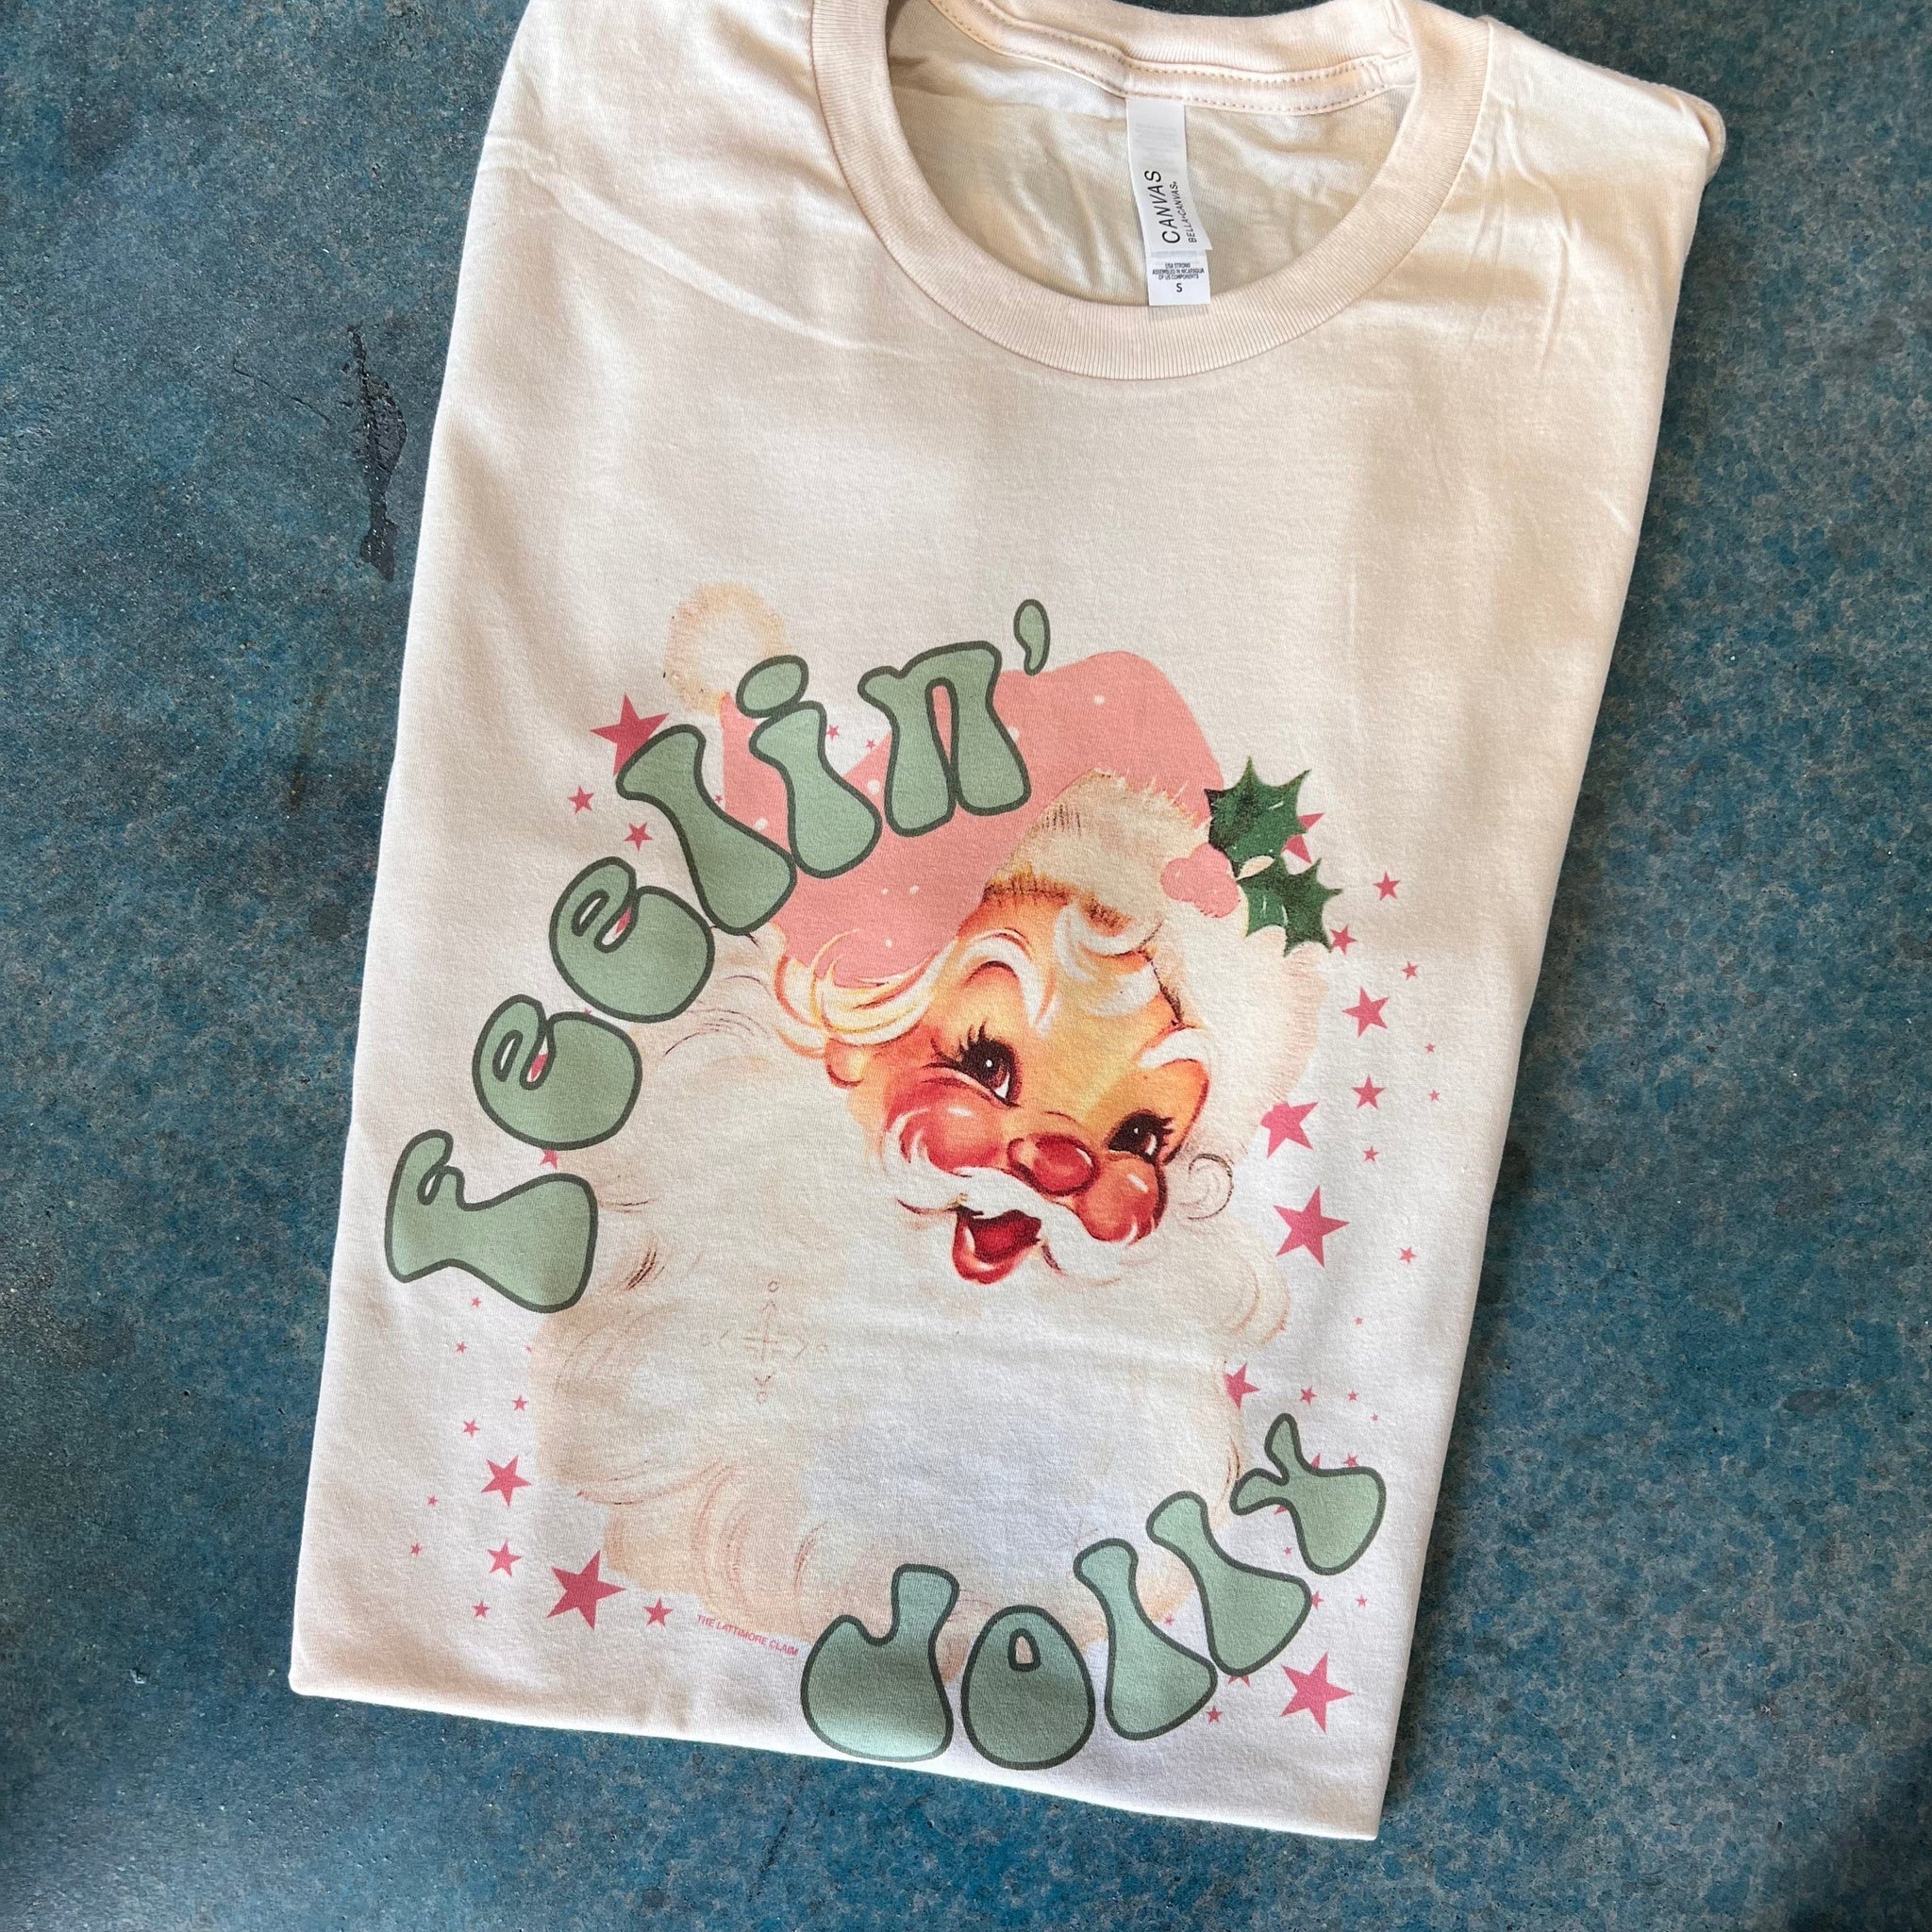 This cream tee includes a crew neckline, short sleeves, and a hand drawn graphic of a vintage Santa Clause, pink stars around him, and the words "Feelin' Jolly" in a fun, green bubble type of font.  The Santa is also wearing a light pink Christmas hat.  The tee is shown pictured here as a folded flatlay. 